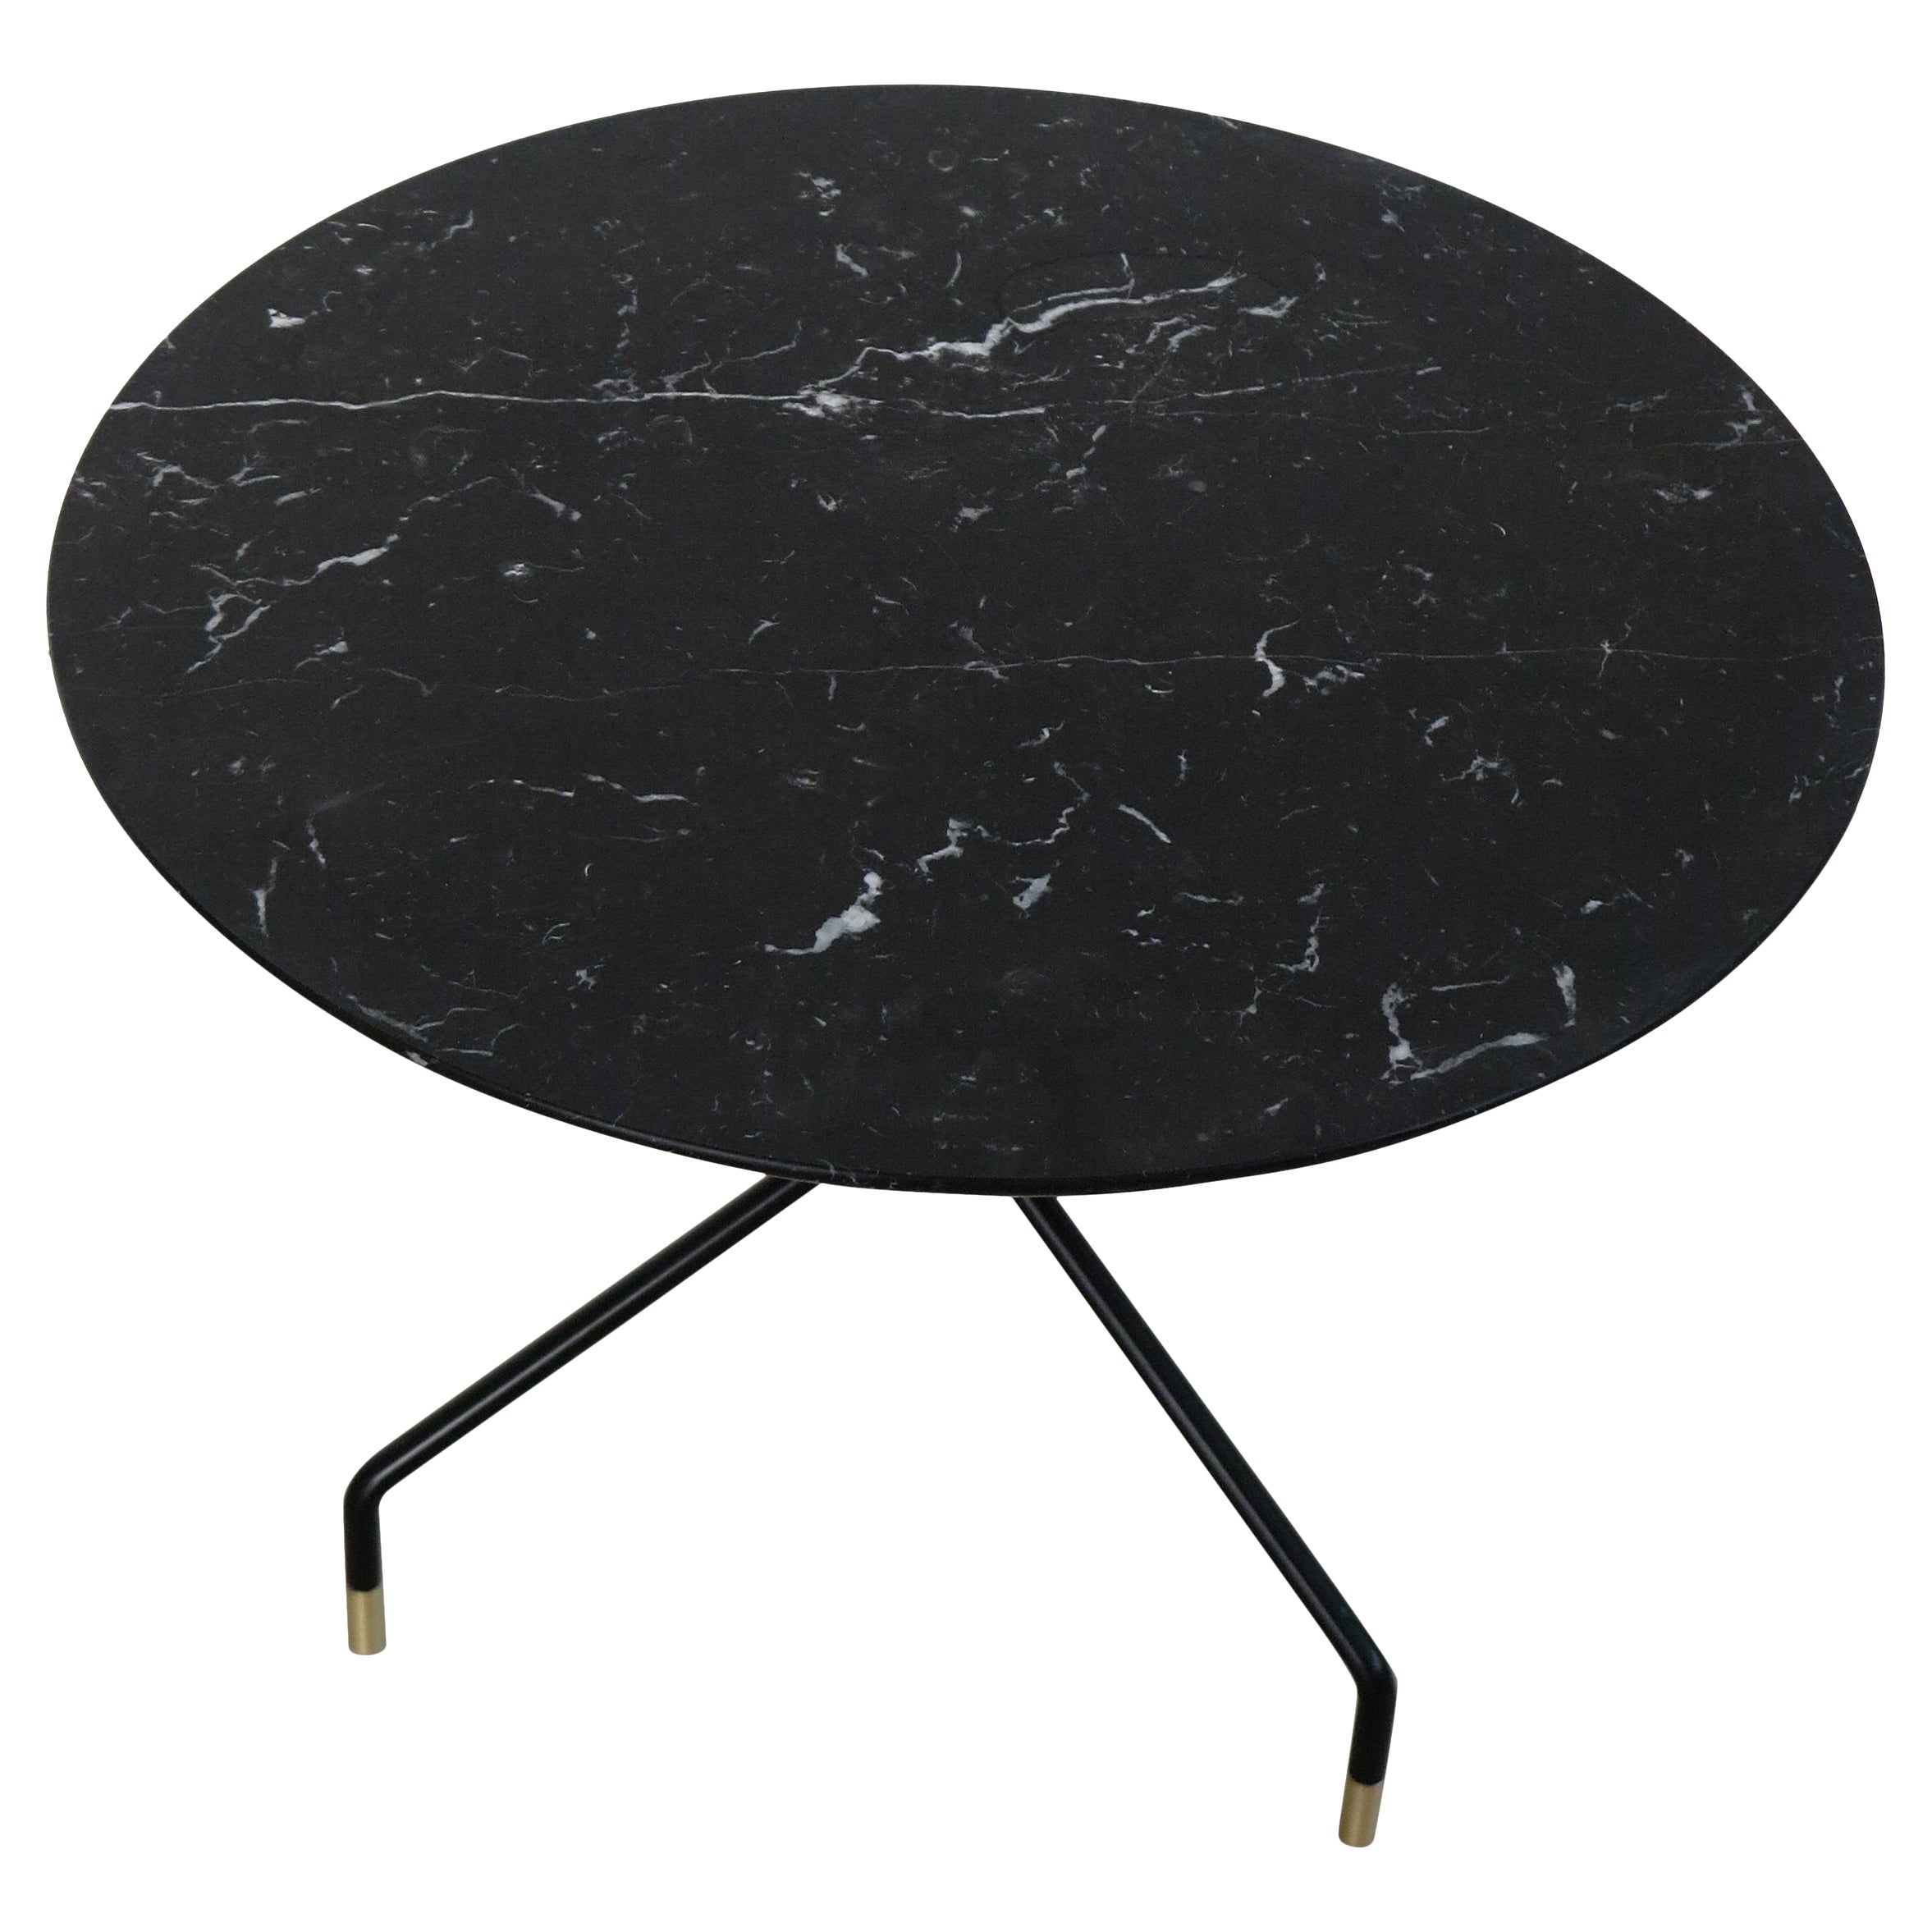 Italian Contemporary Black Marble Round Coffee Table New Design Capperidicasa For Sale